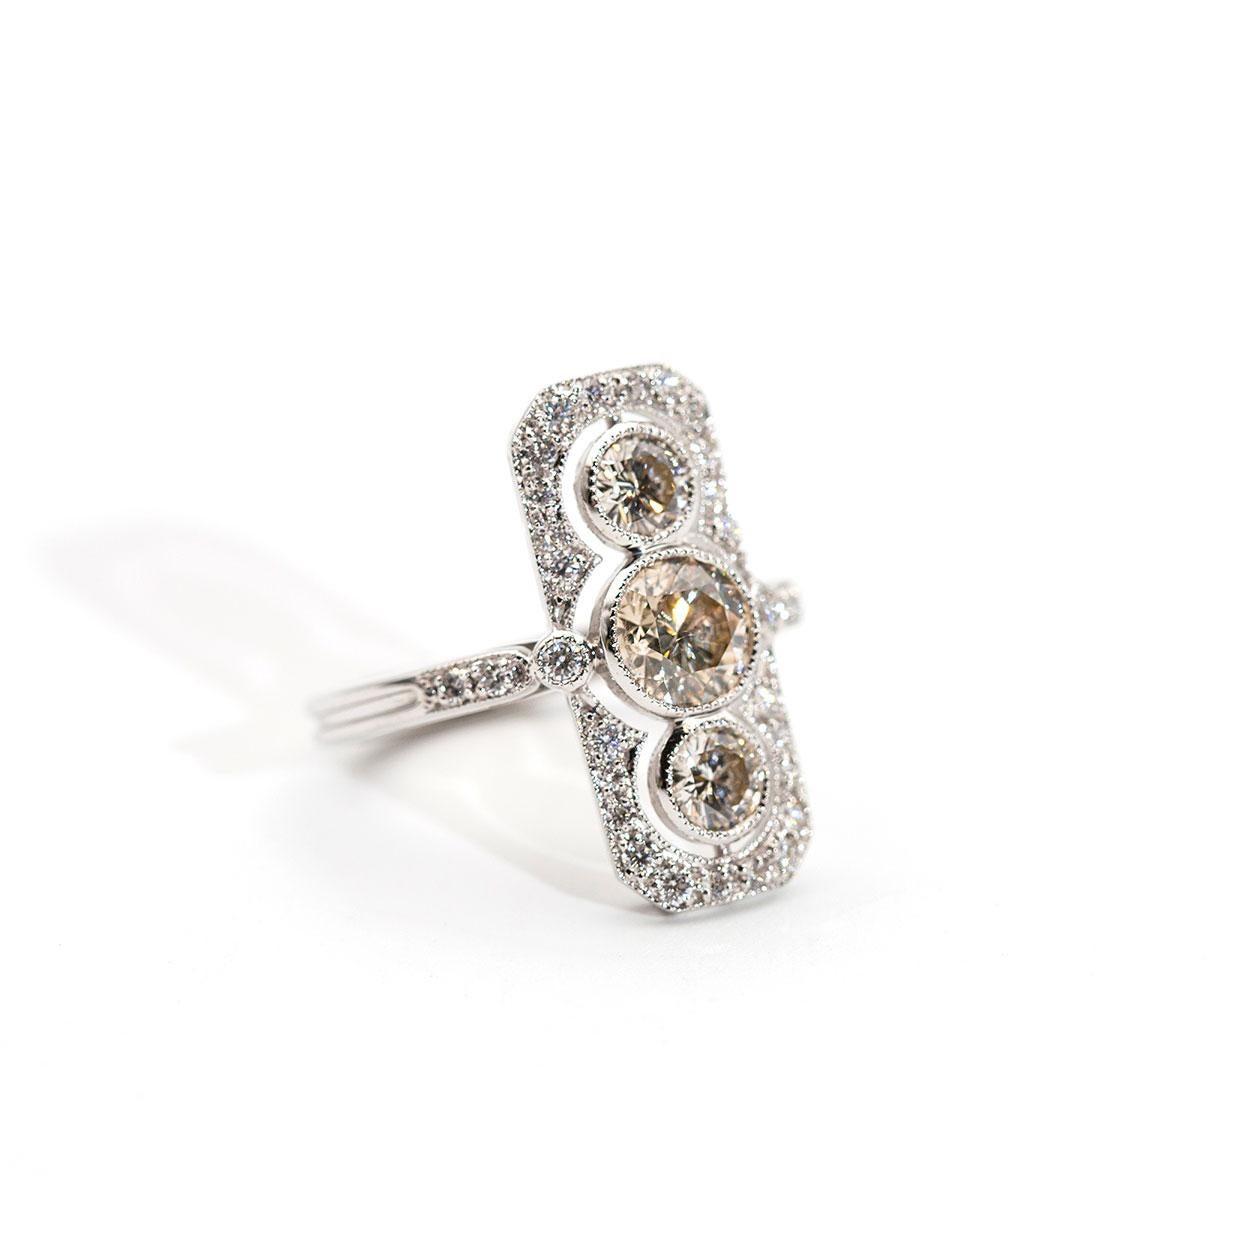 This art deco inspired three stone ring is forged 18 carat white gold and boasts a total of 1.82 carats of alluring bright round brilliant cut diamonds with the largest centre diamond certified. The featured three diamonds come to life with the